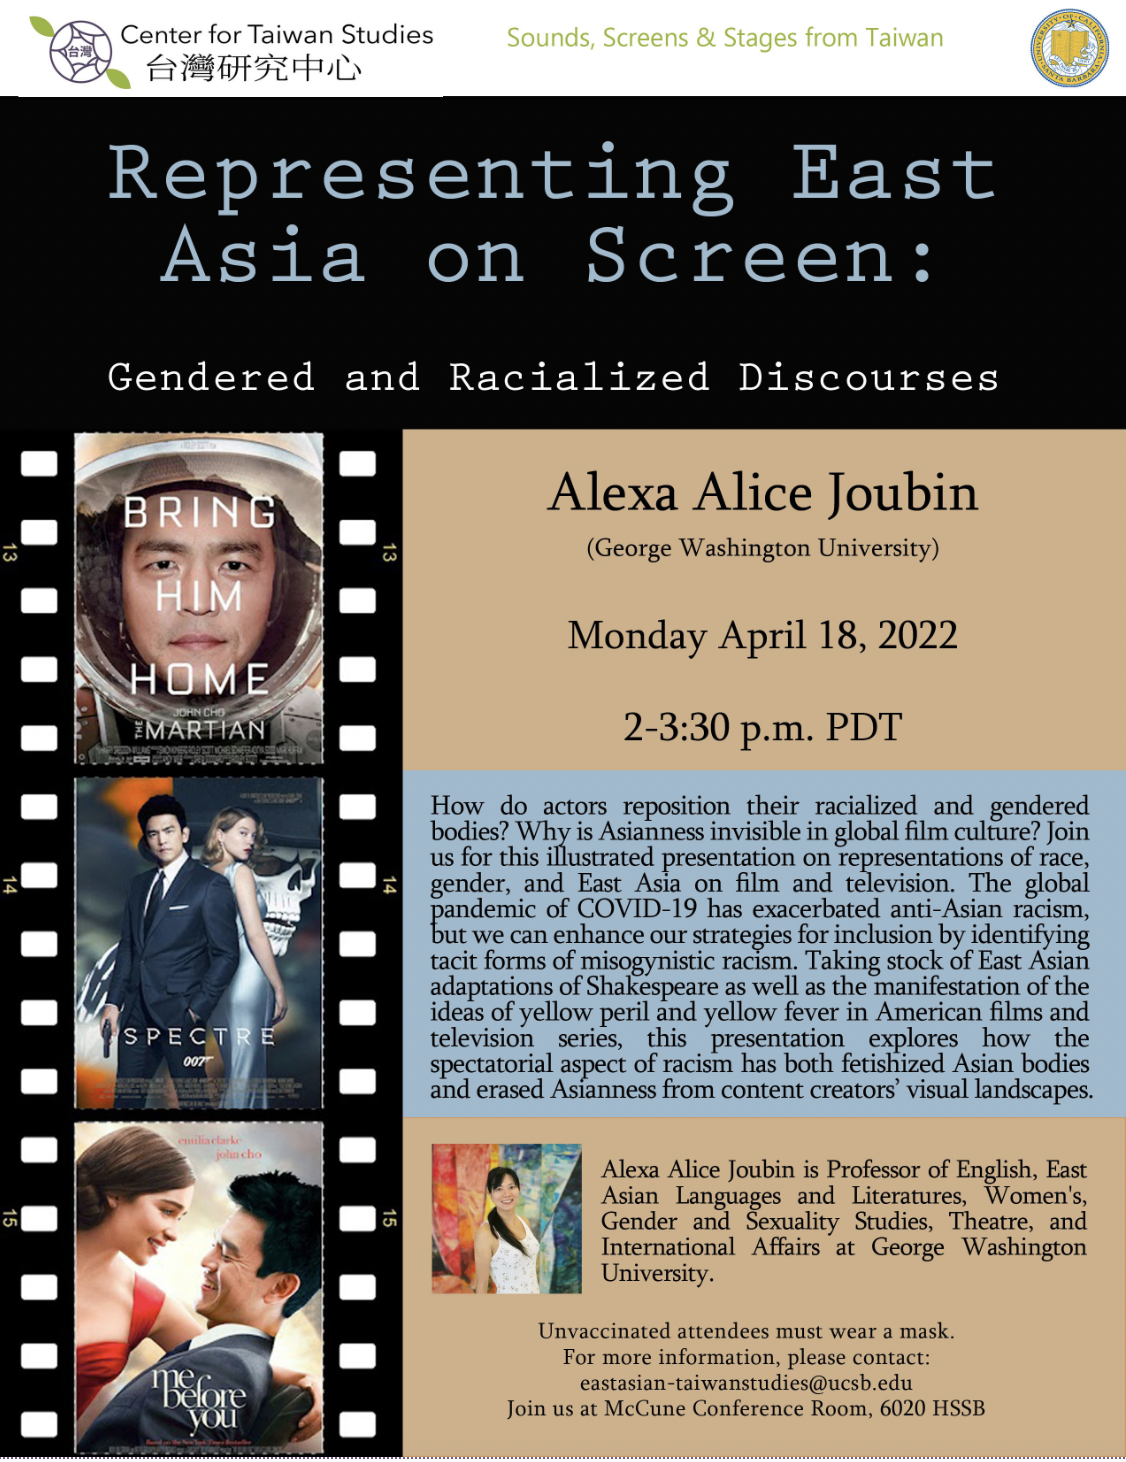 Flyer for "Representing East Asia on Screen: Gendered and Racialized Discourses" with Alexa Joubin on April 18, 2022 from 2-3:30PM in 6020 HSSB